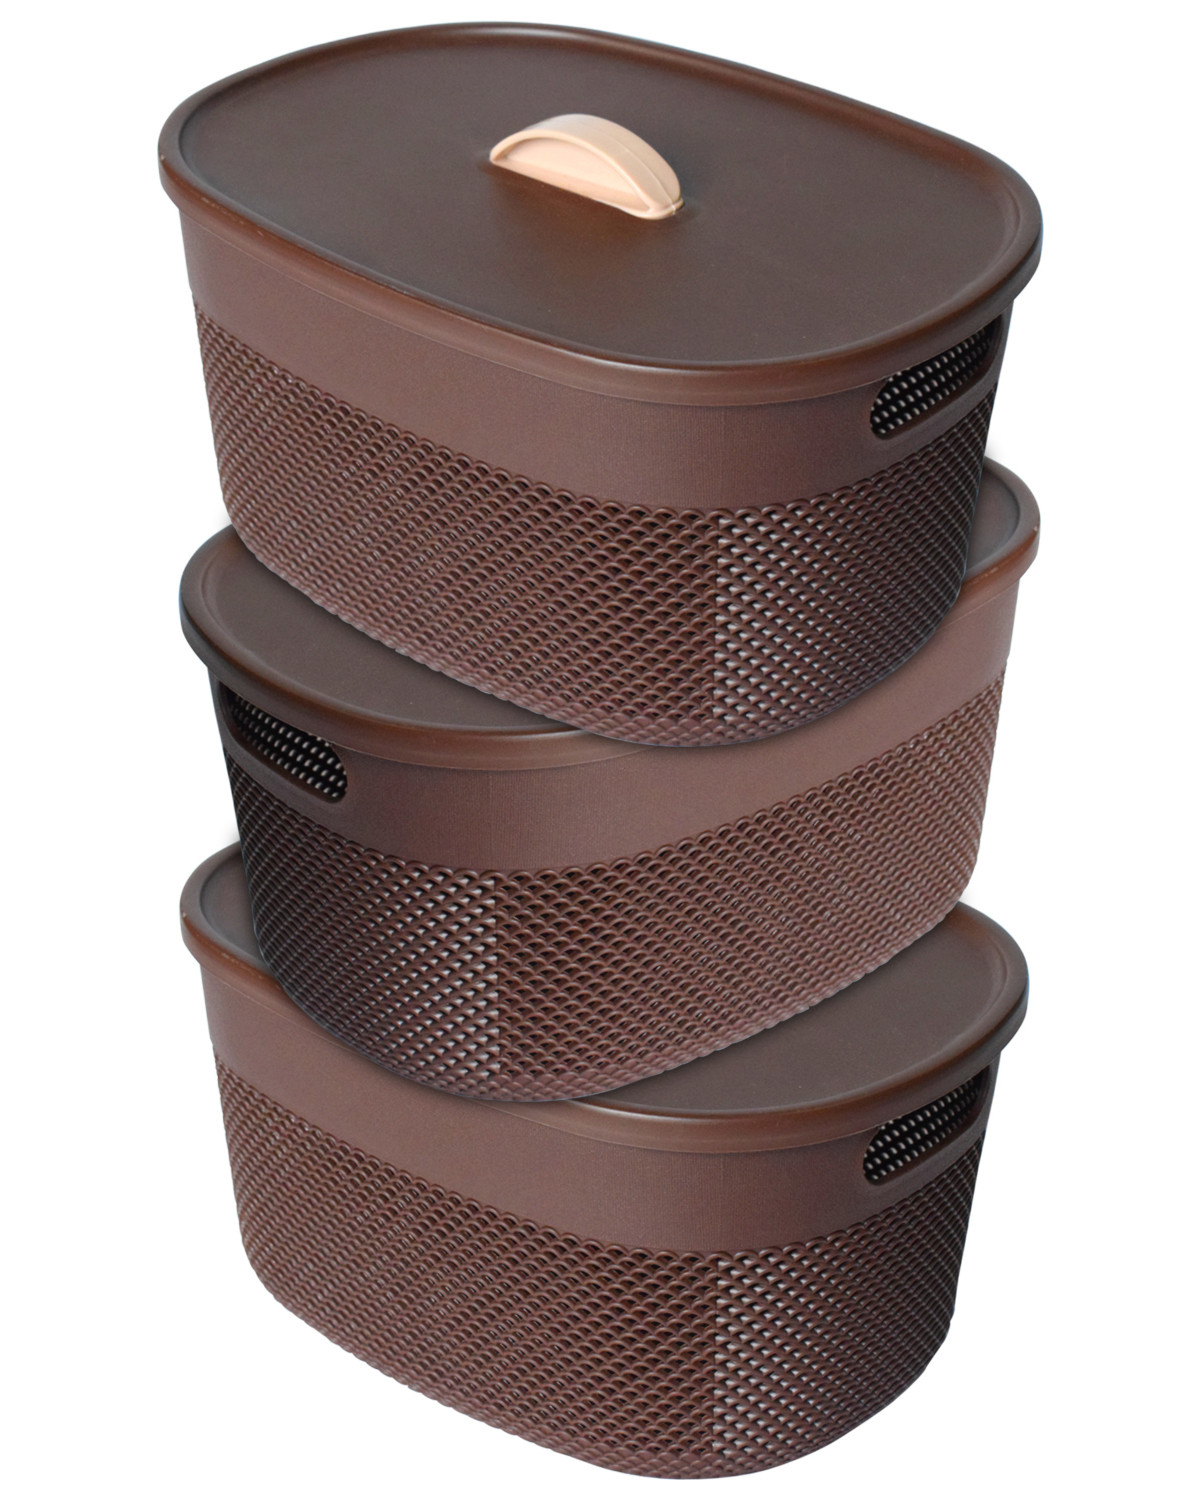 Kuber Industries Unbreakable Large Multipurpose Storage Baskets with lid|Design-Netted|Material-Plastic|Shape-Oval|Color-Brown